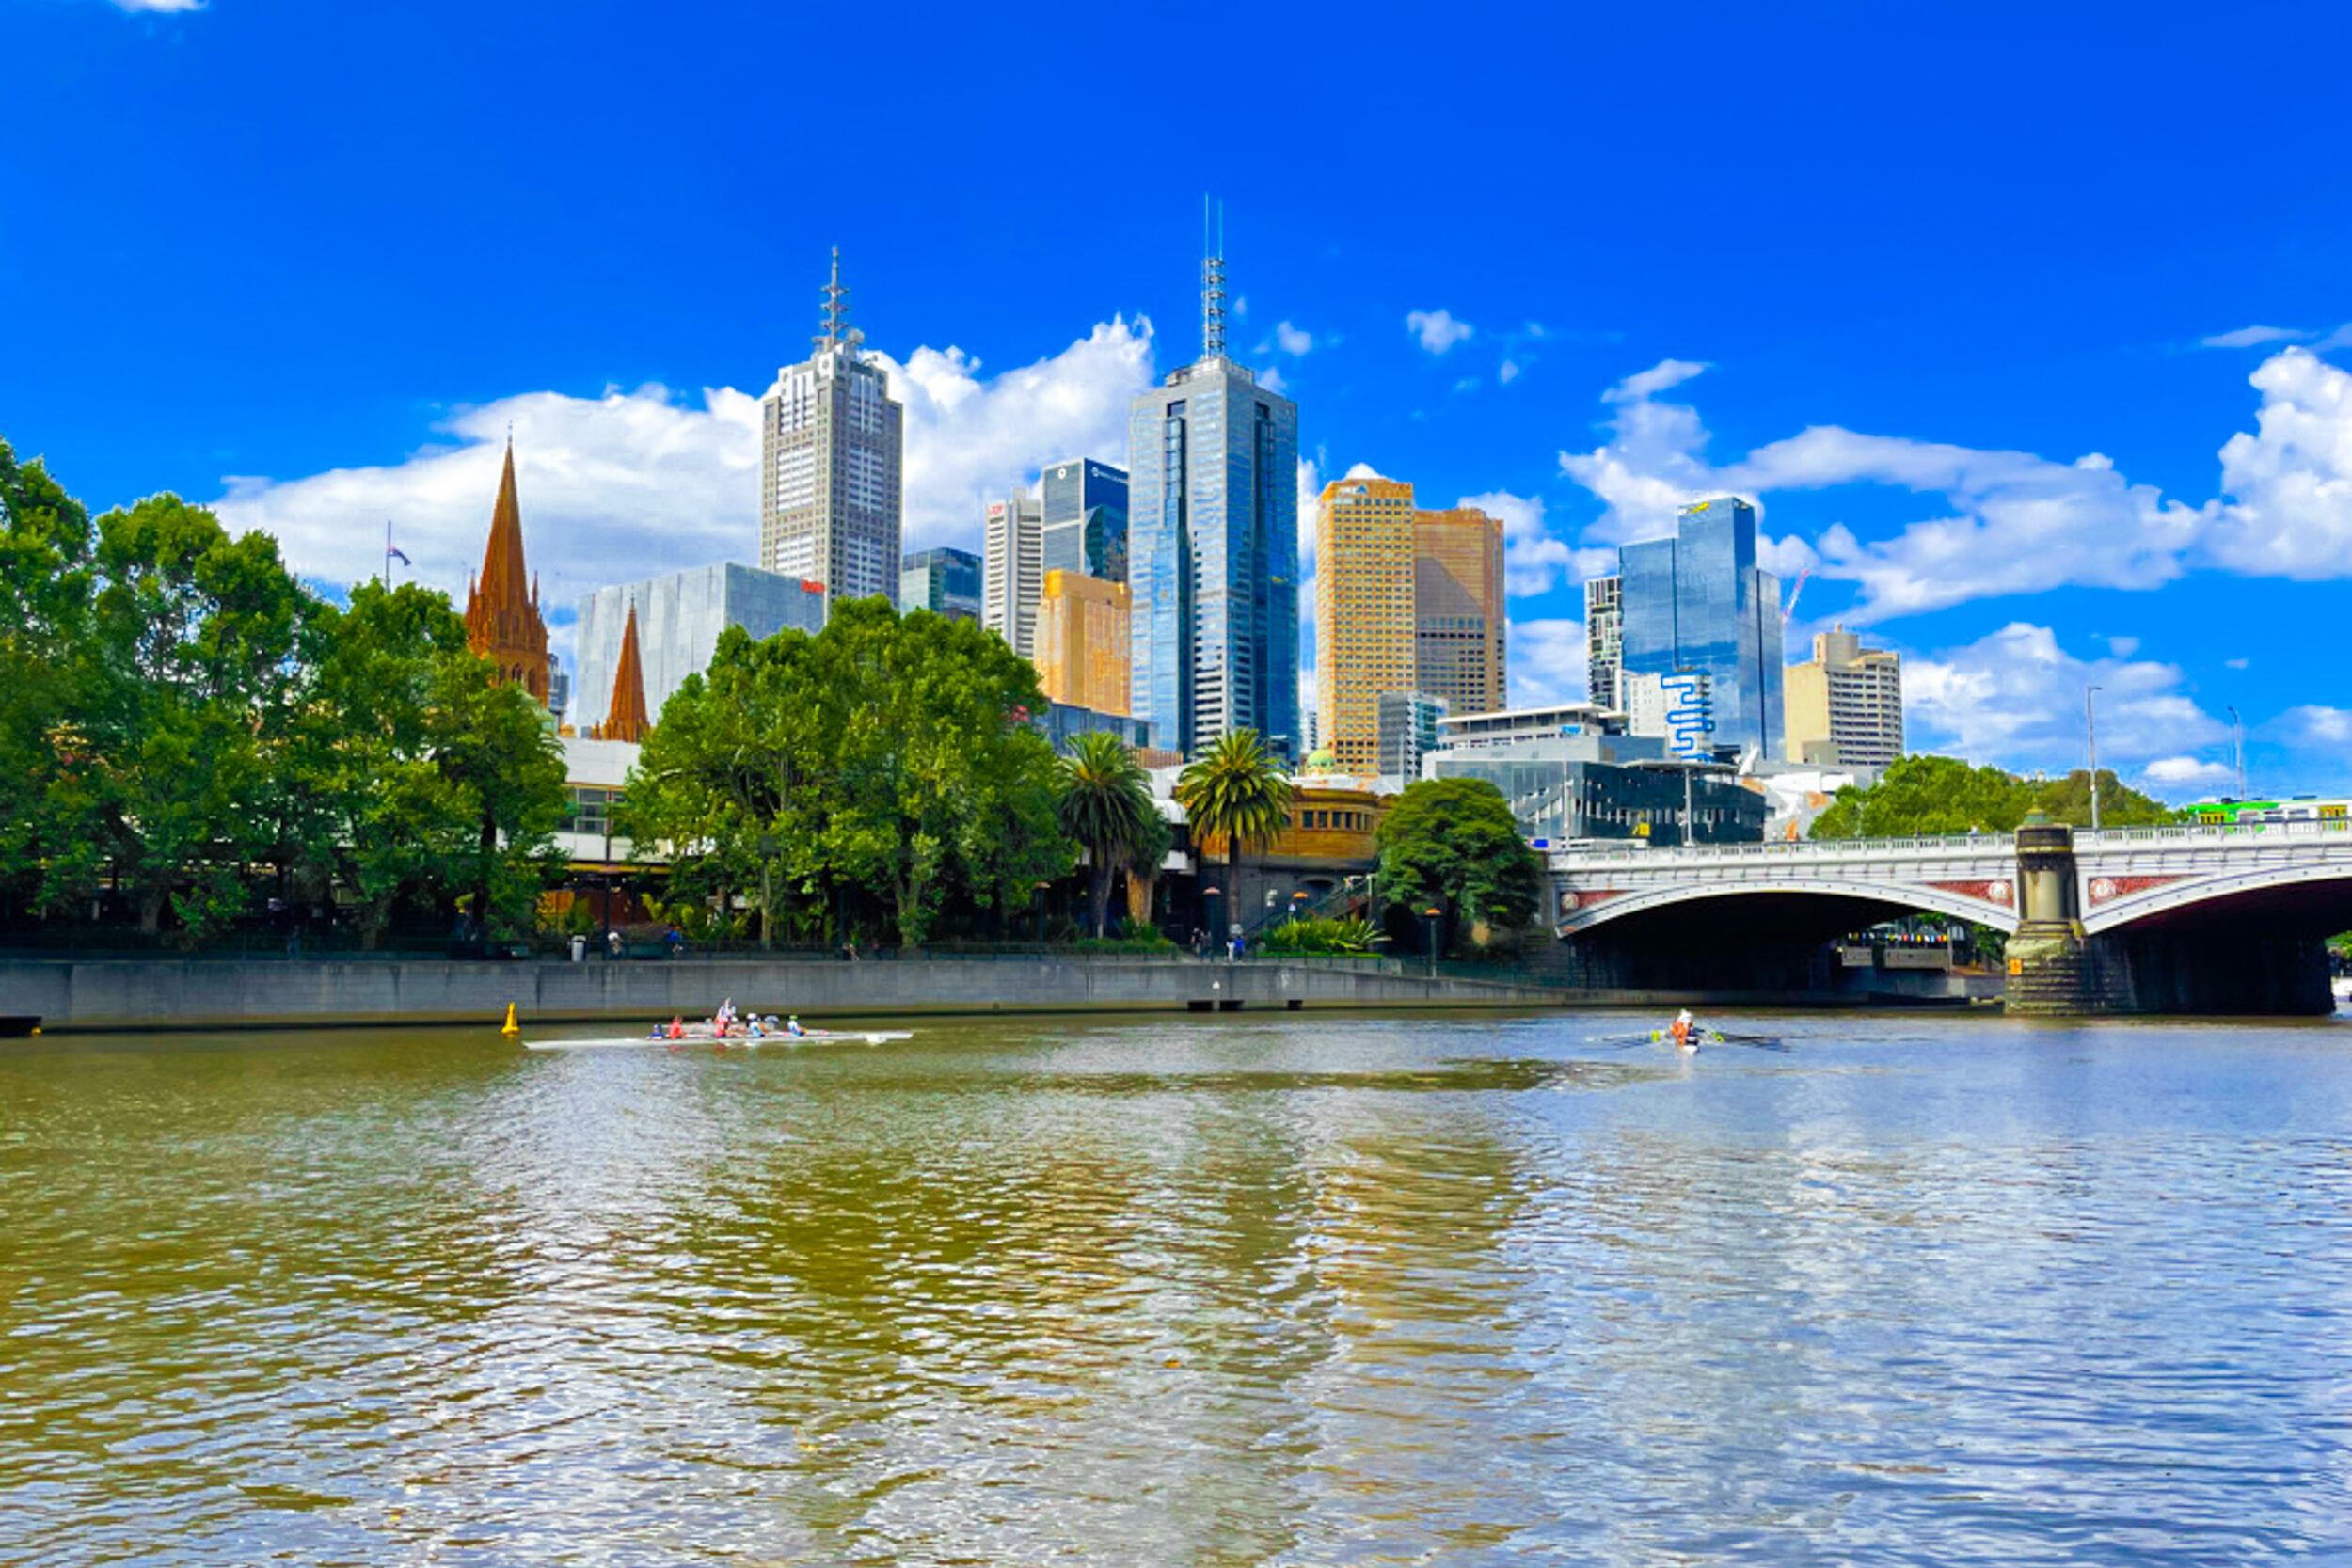 In the distance, the skyscrapers of Melbourne's CBD reflect the sunlight and blue sky on a sunny day. In front of the buildings, the murky Yarra River passes beneath a bridge.